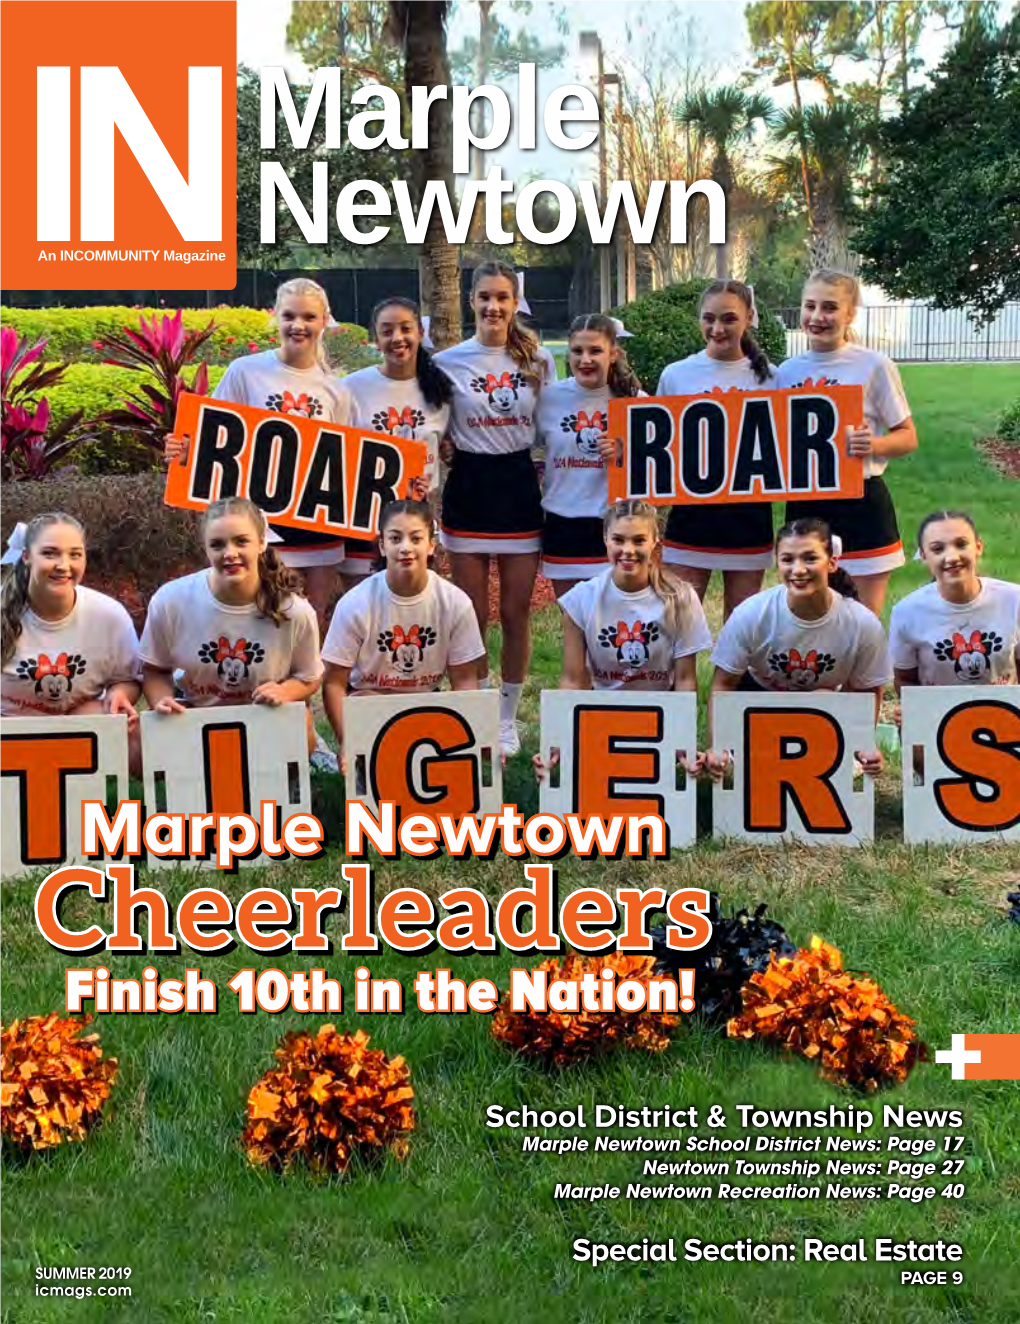 Marple Newtown Cheerleaders Finish 10Th in the Nation!